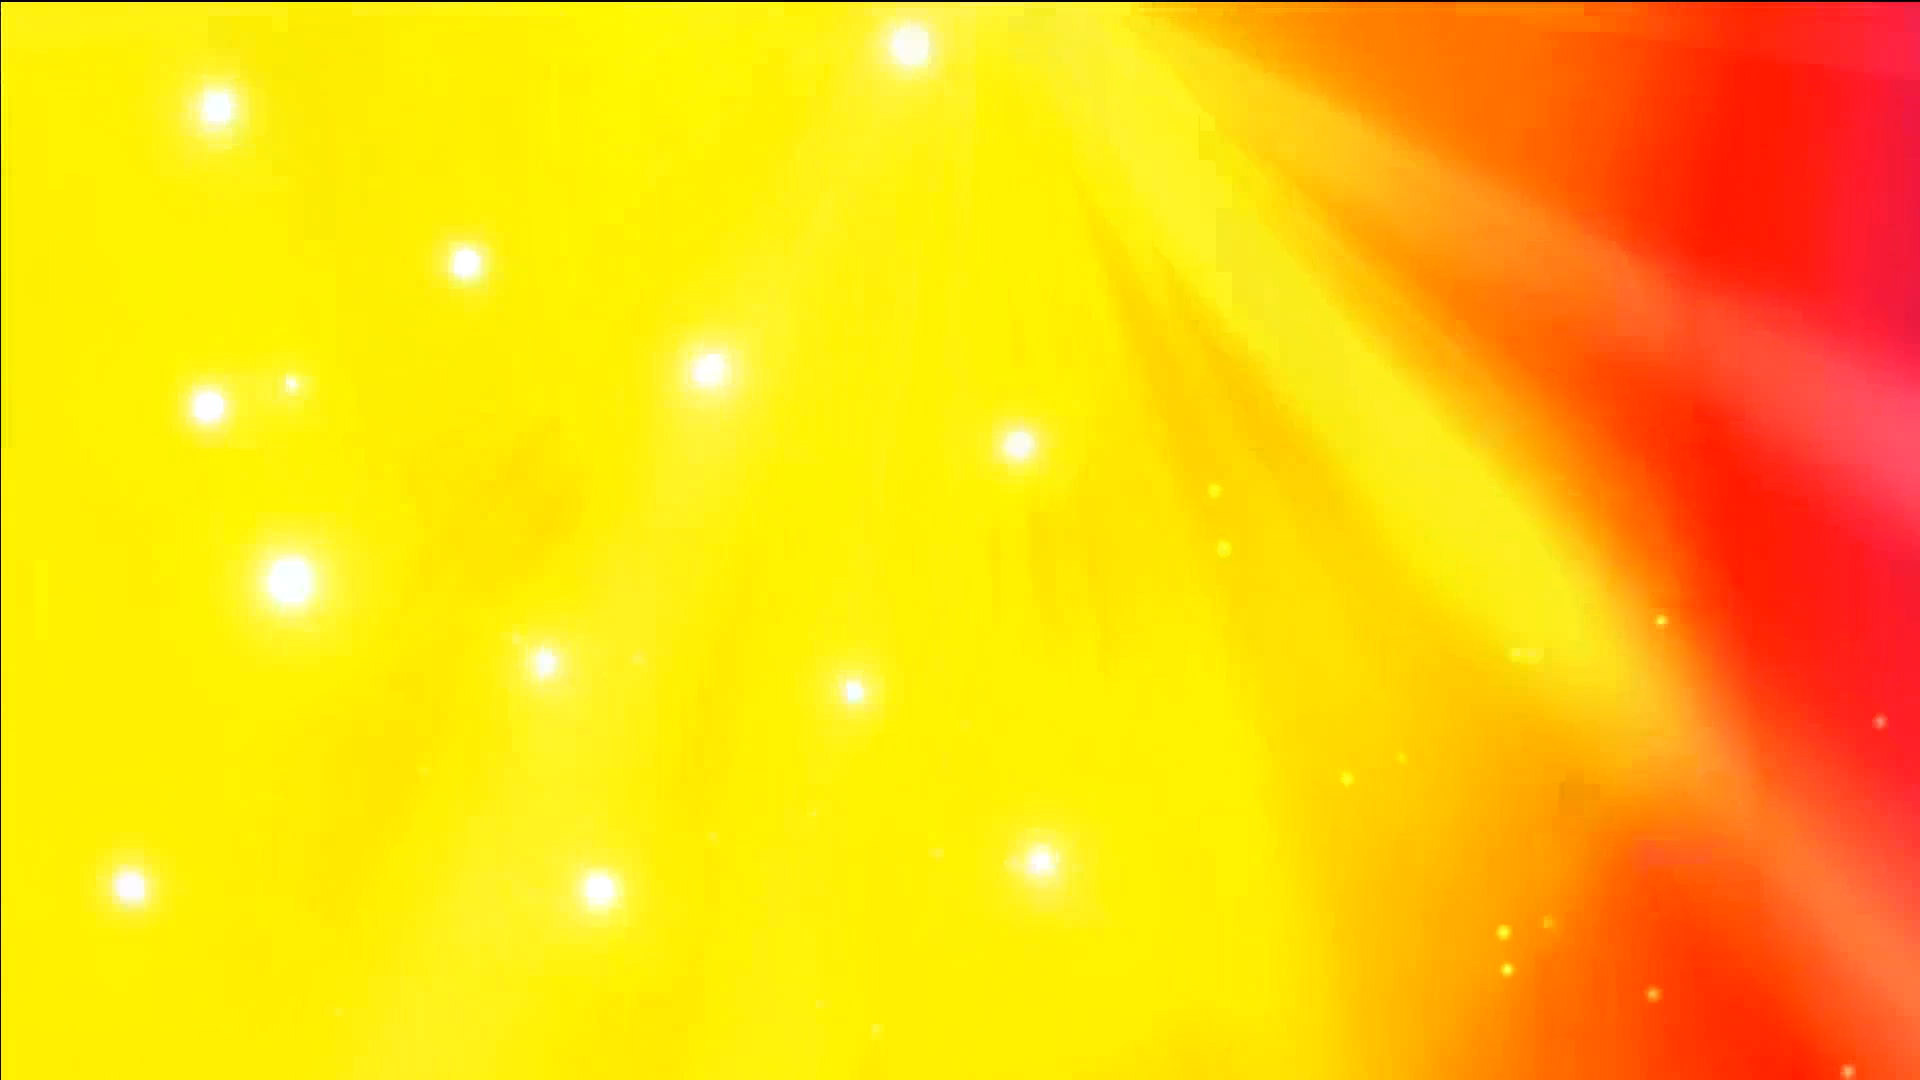 Animated yellow lights background video for title, intro